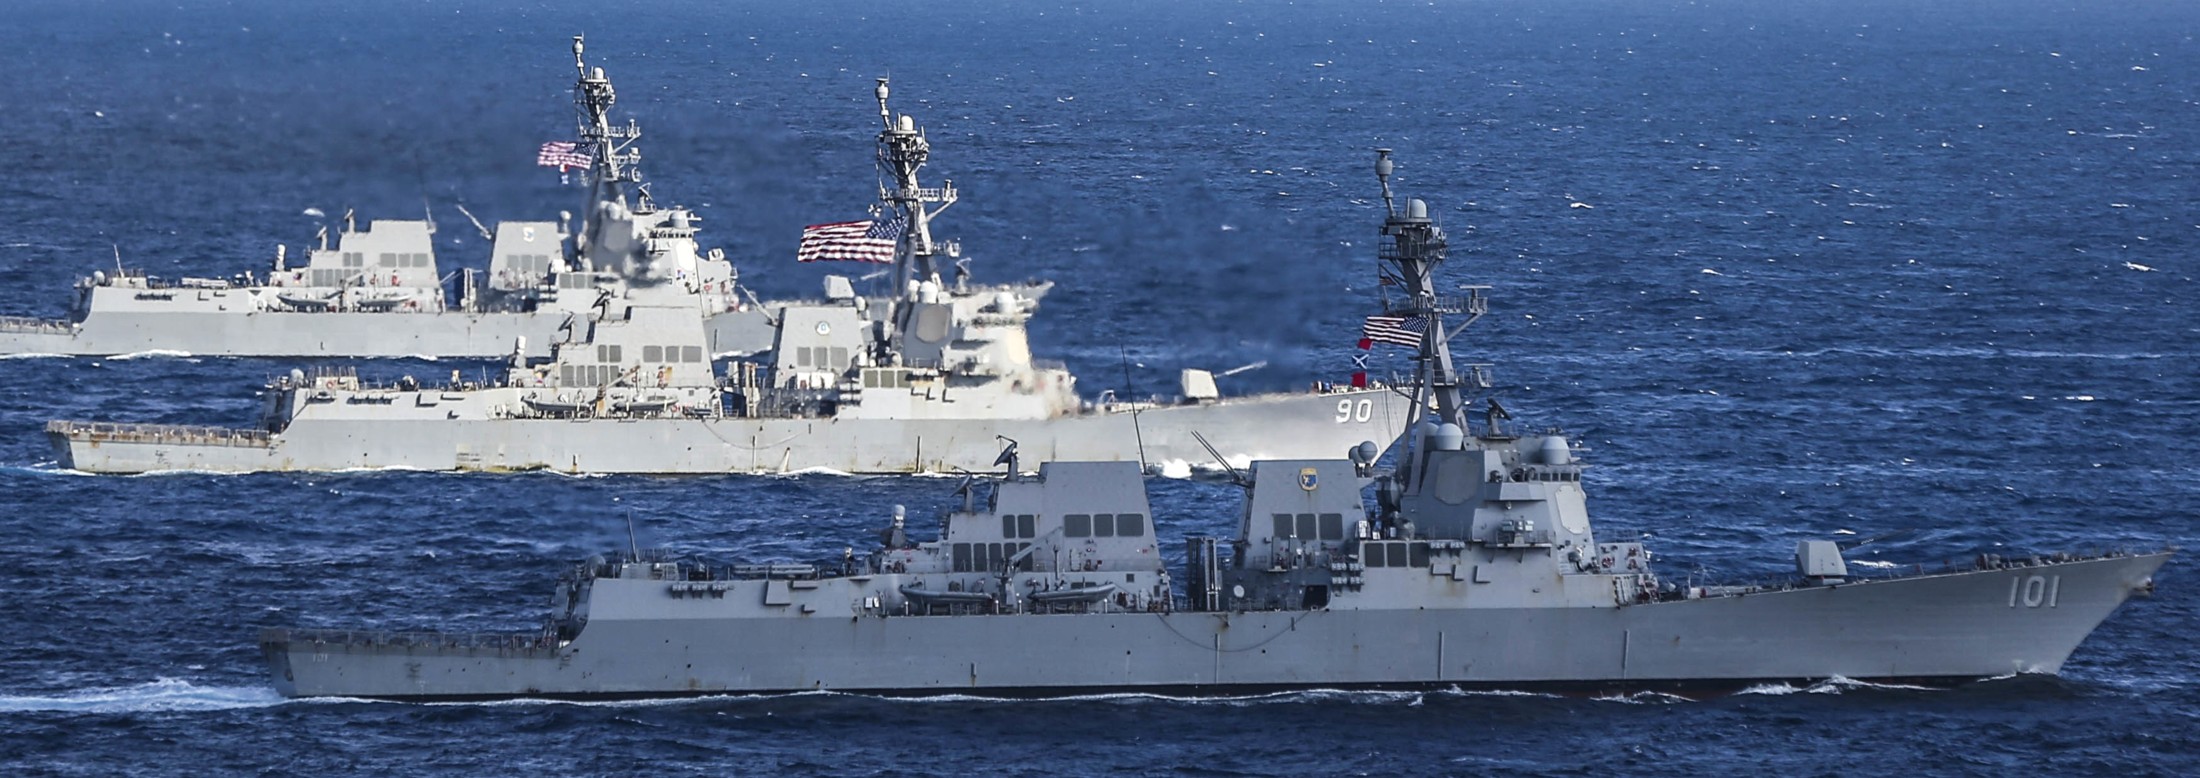 ddg-101 uss gridley arleigh burke class guided missile destroyer aegis us navy 75